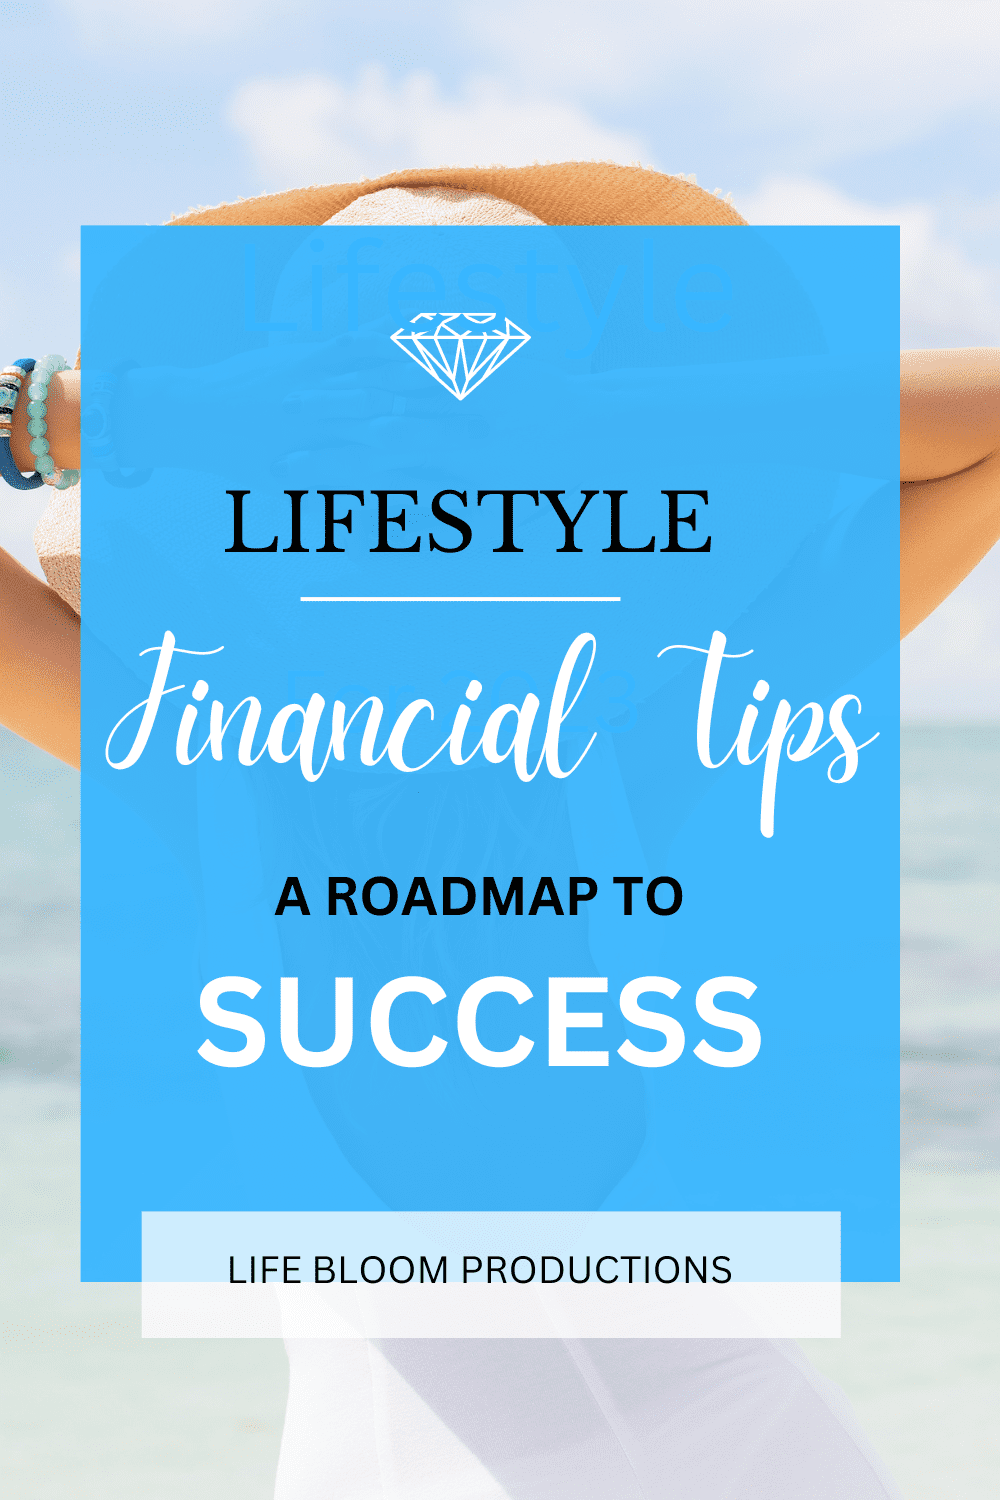 07 lIFESTYLE FINANCIAL TIPS